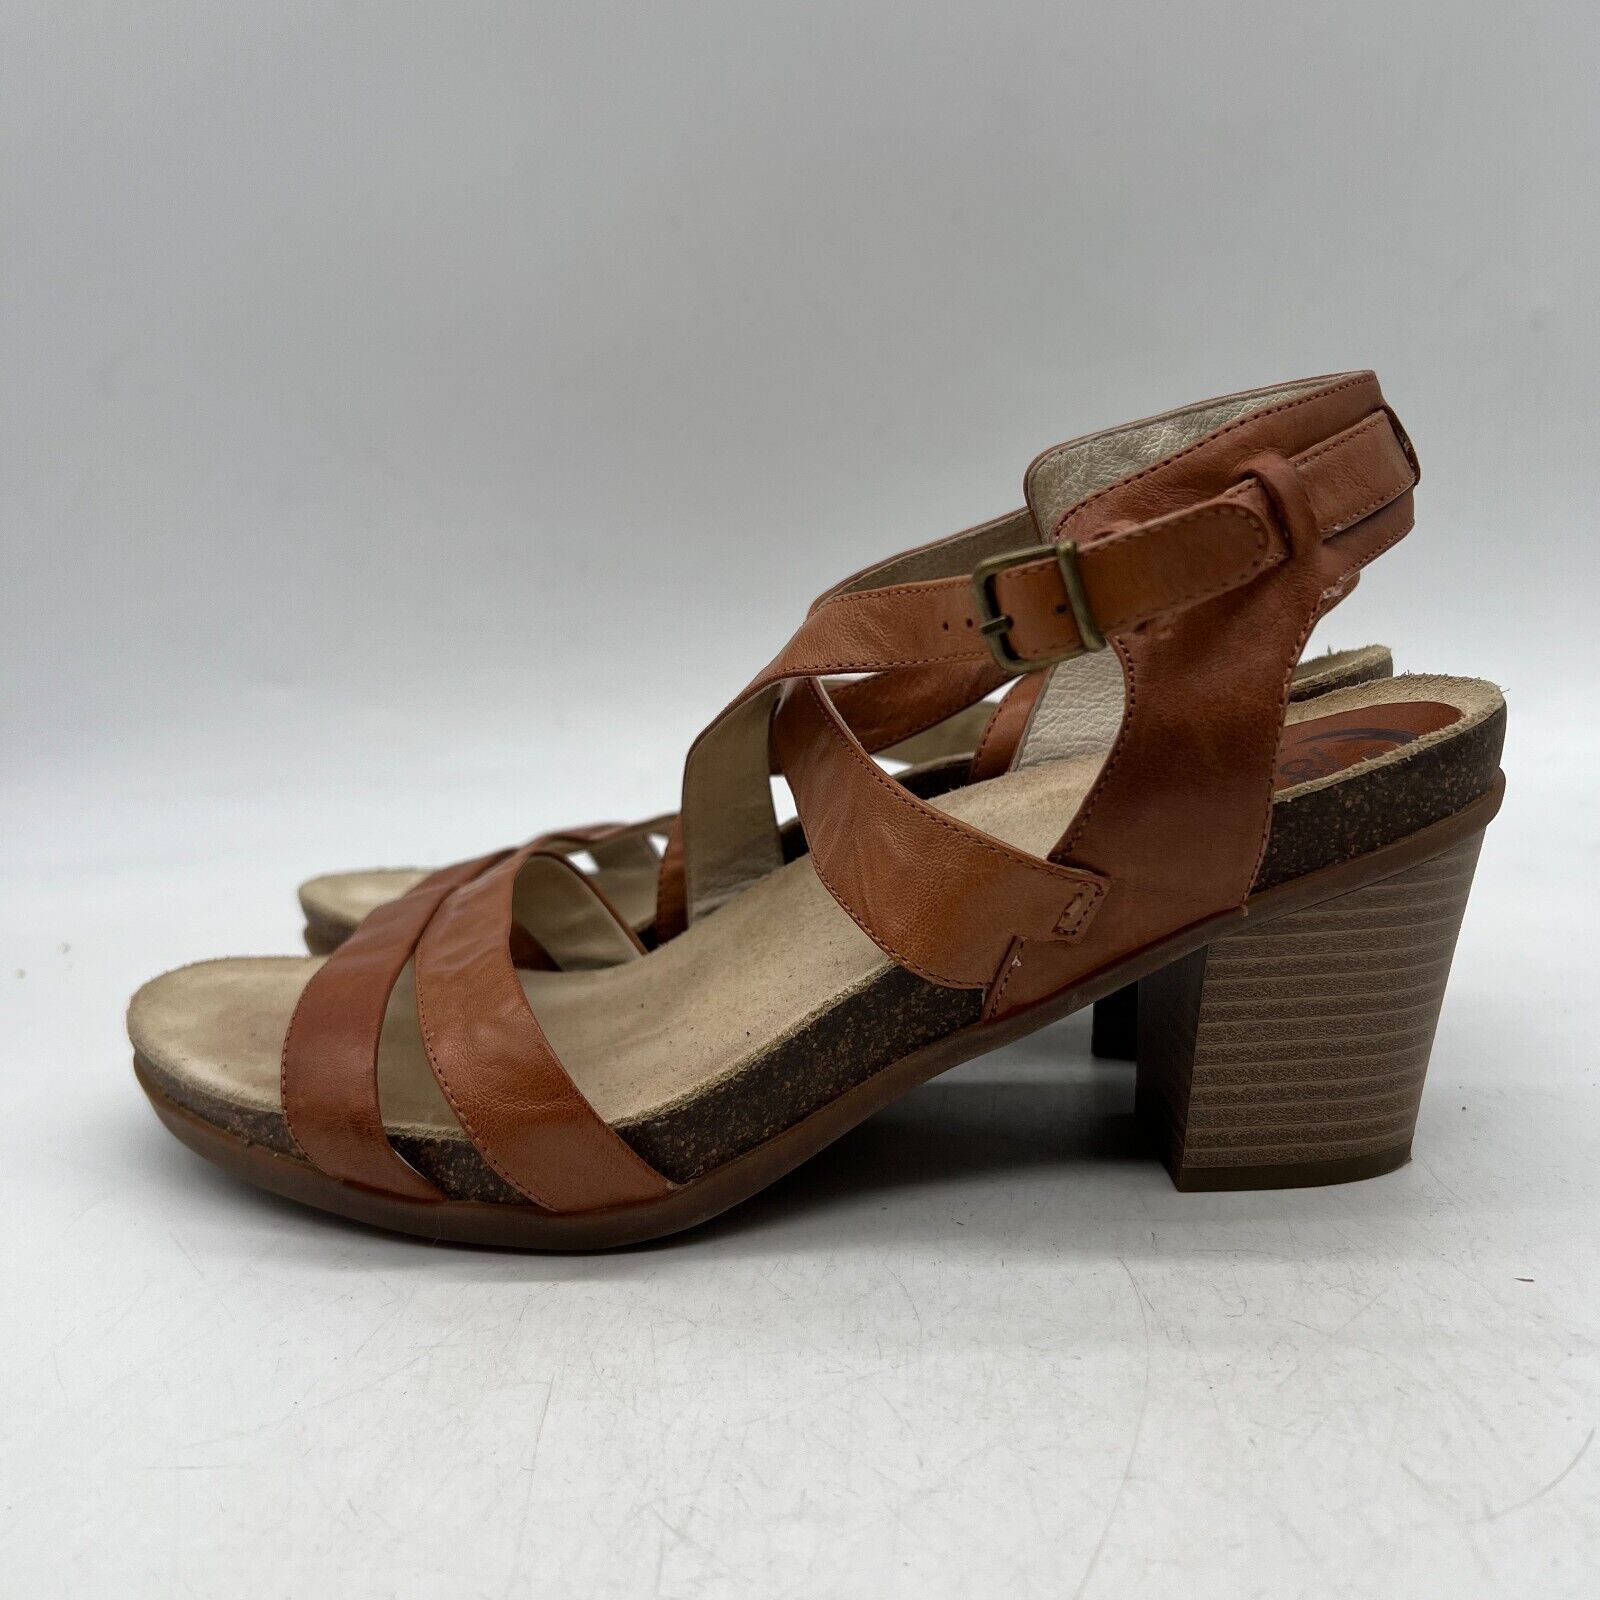 Primary image for Abeo Biana Womens Brown Tan Leather Buckle Strappy Sandals Size 10